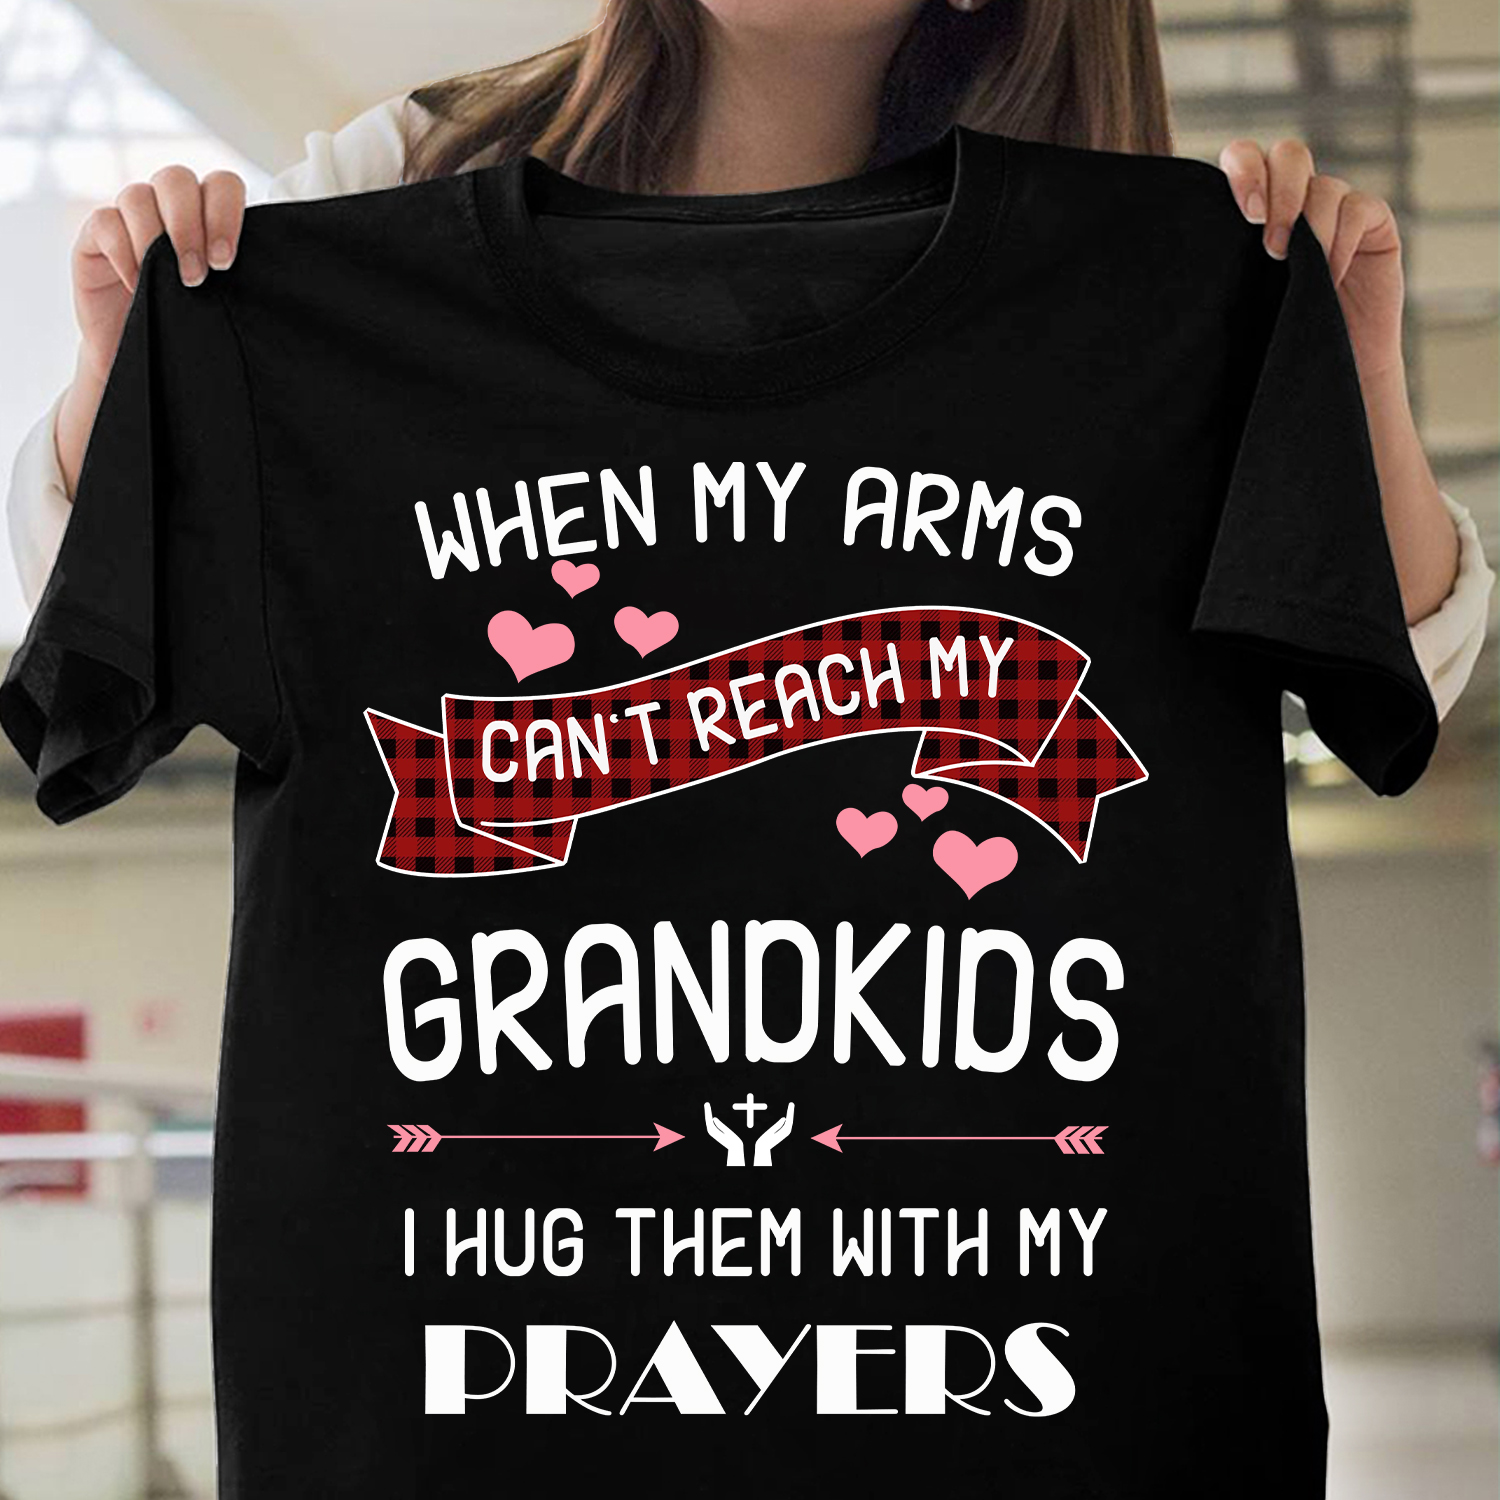 When my arms can't reach my grandkids I hug them with my prayers - Grandkids and grandparents